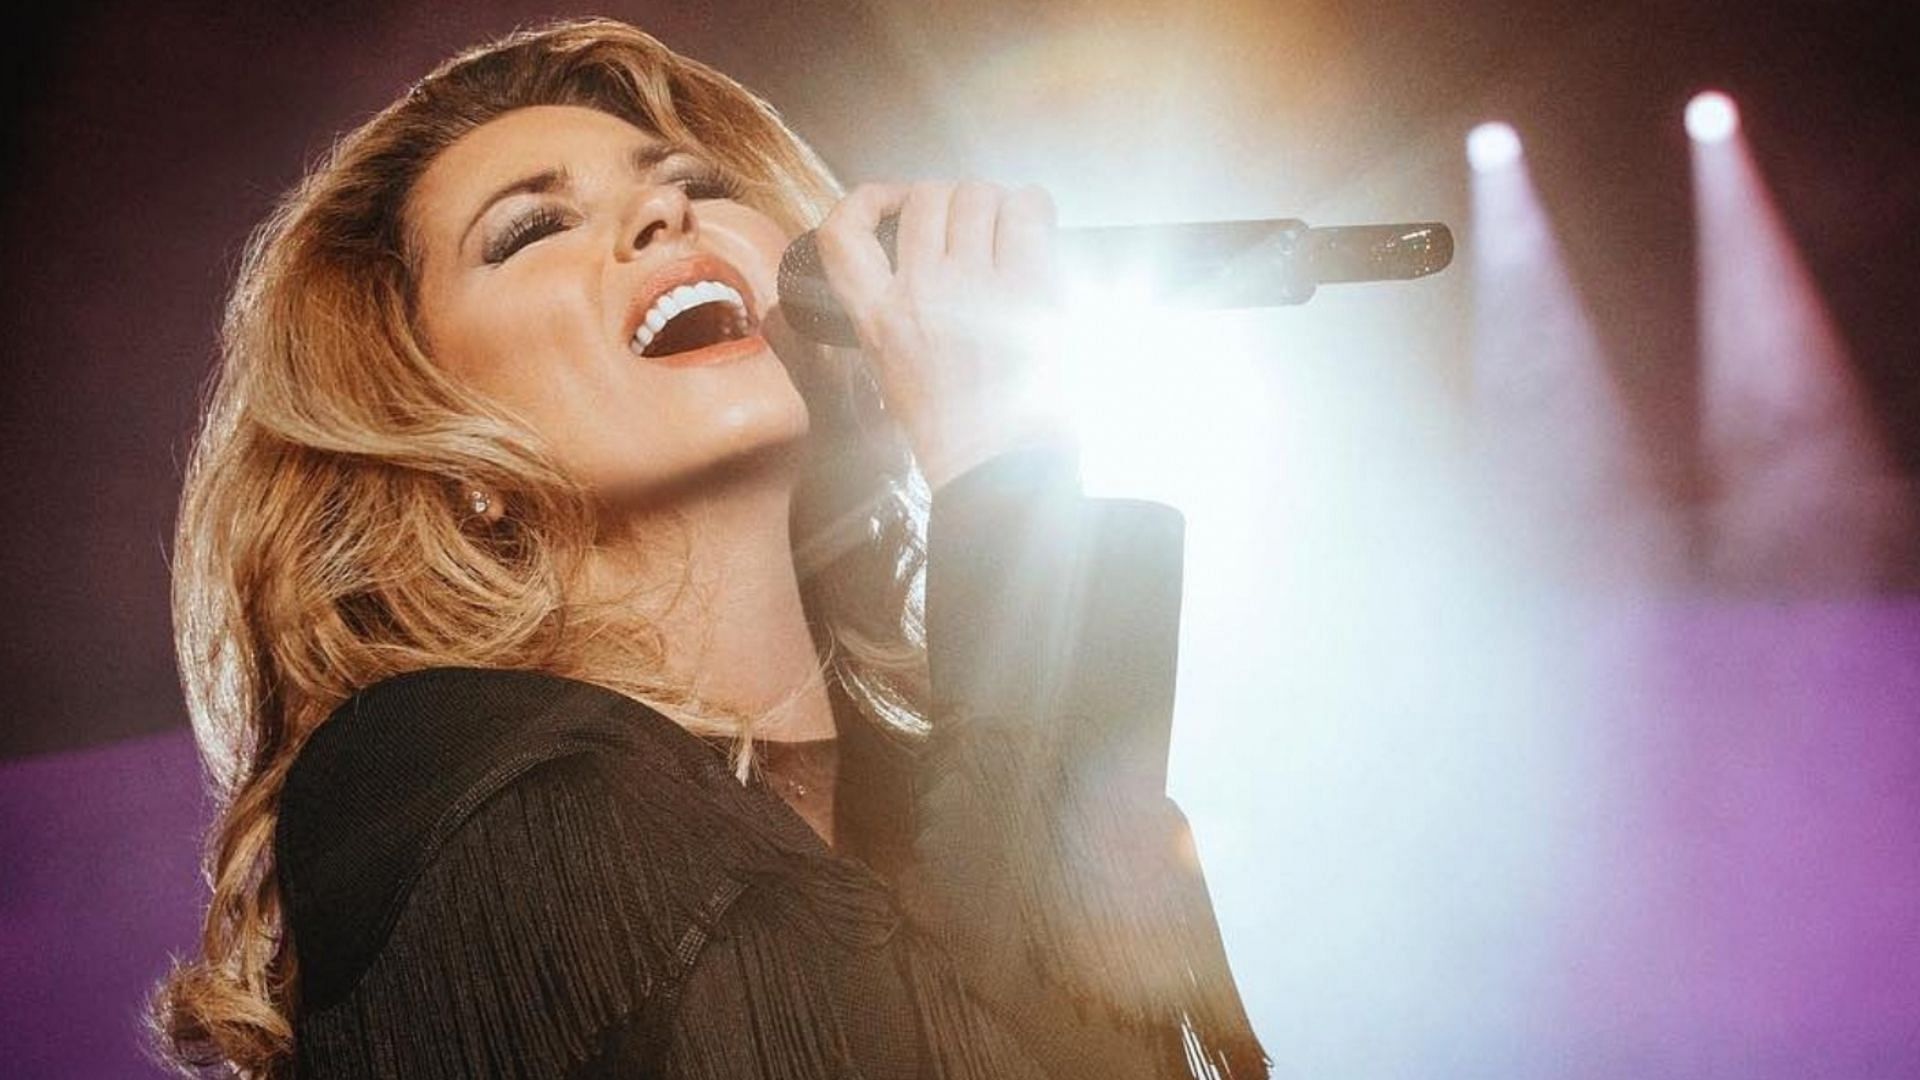 Shania Twain is among the headliners announced for Tortuga Music Festival 2023. (Image via Getty)